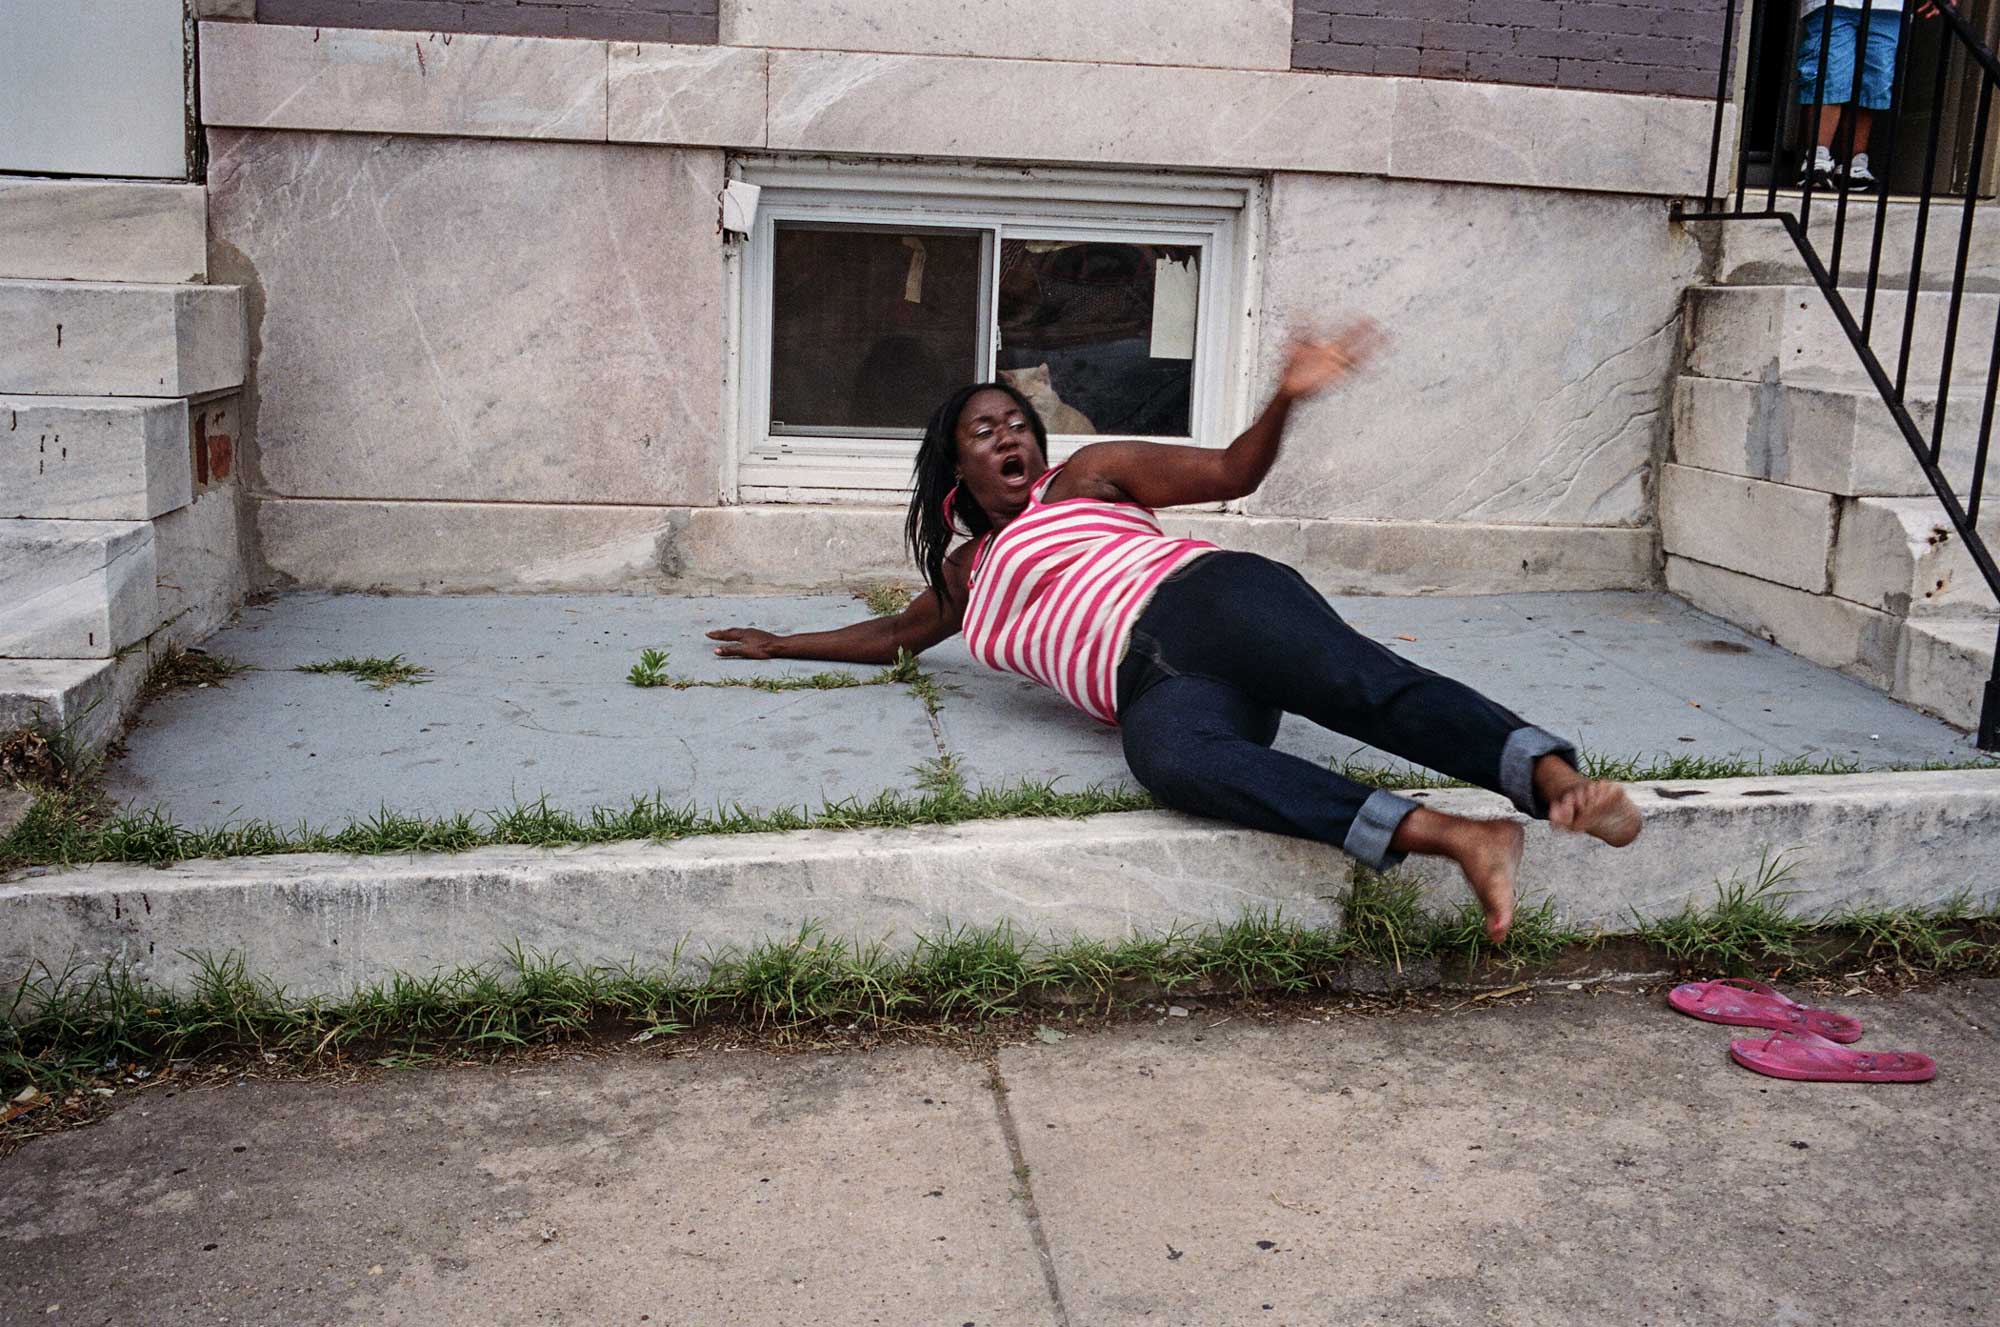 A woman hangs out in front of her house in Baltimore